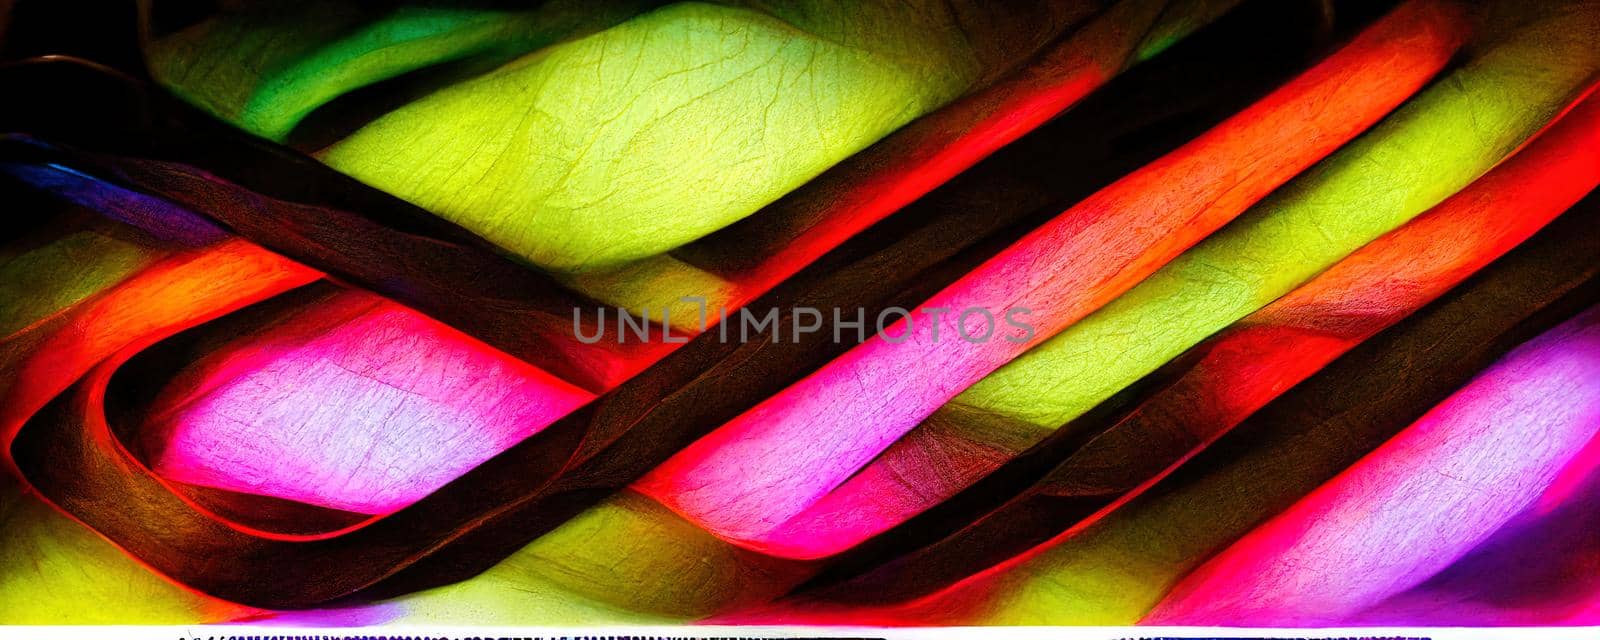 3D illustration of neon rays forming lines in bright juicy colors on a black background.